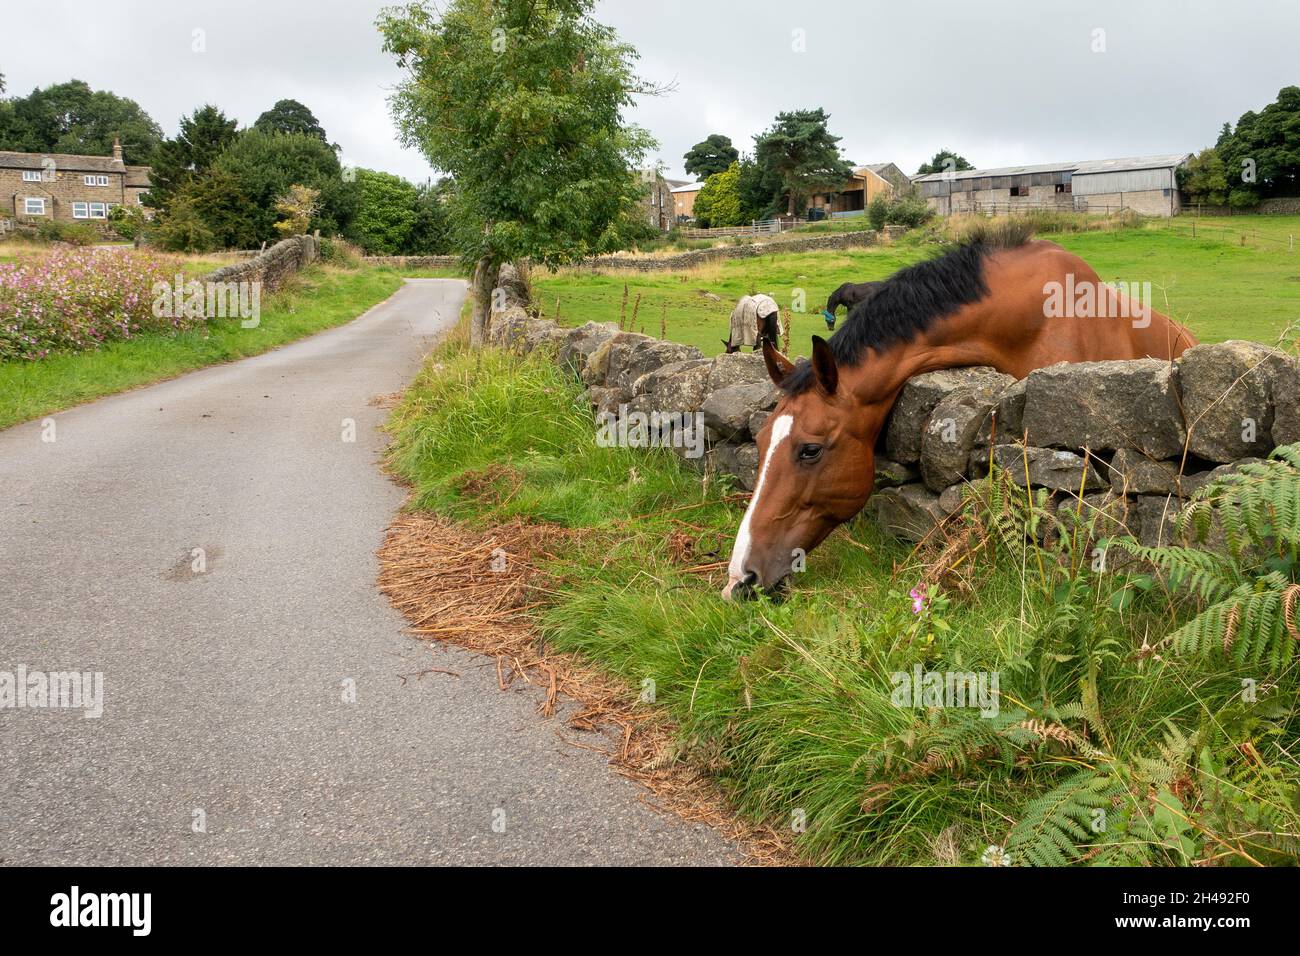 Horse eating grass on the other side of a stone wall, the grass is always greener on the other side! UK Stock Photo